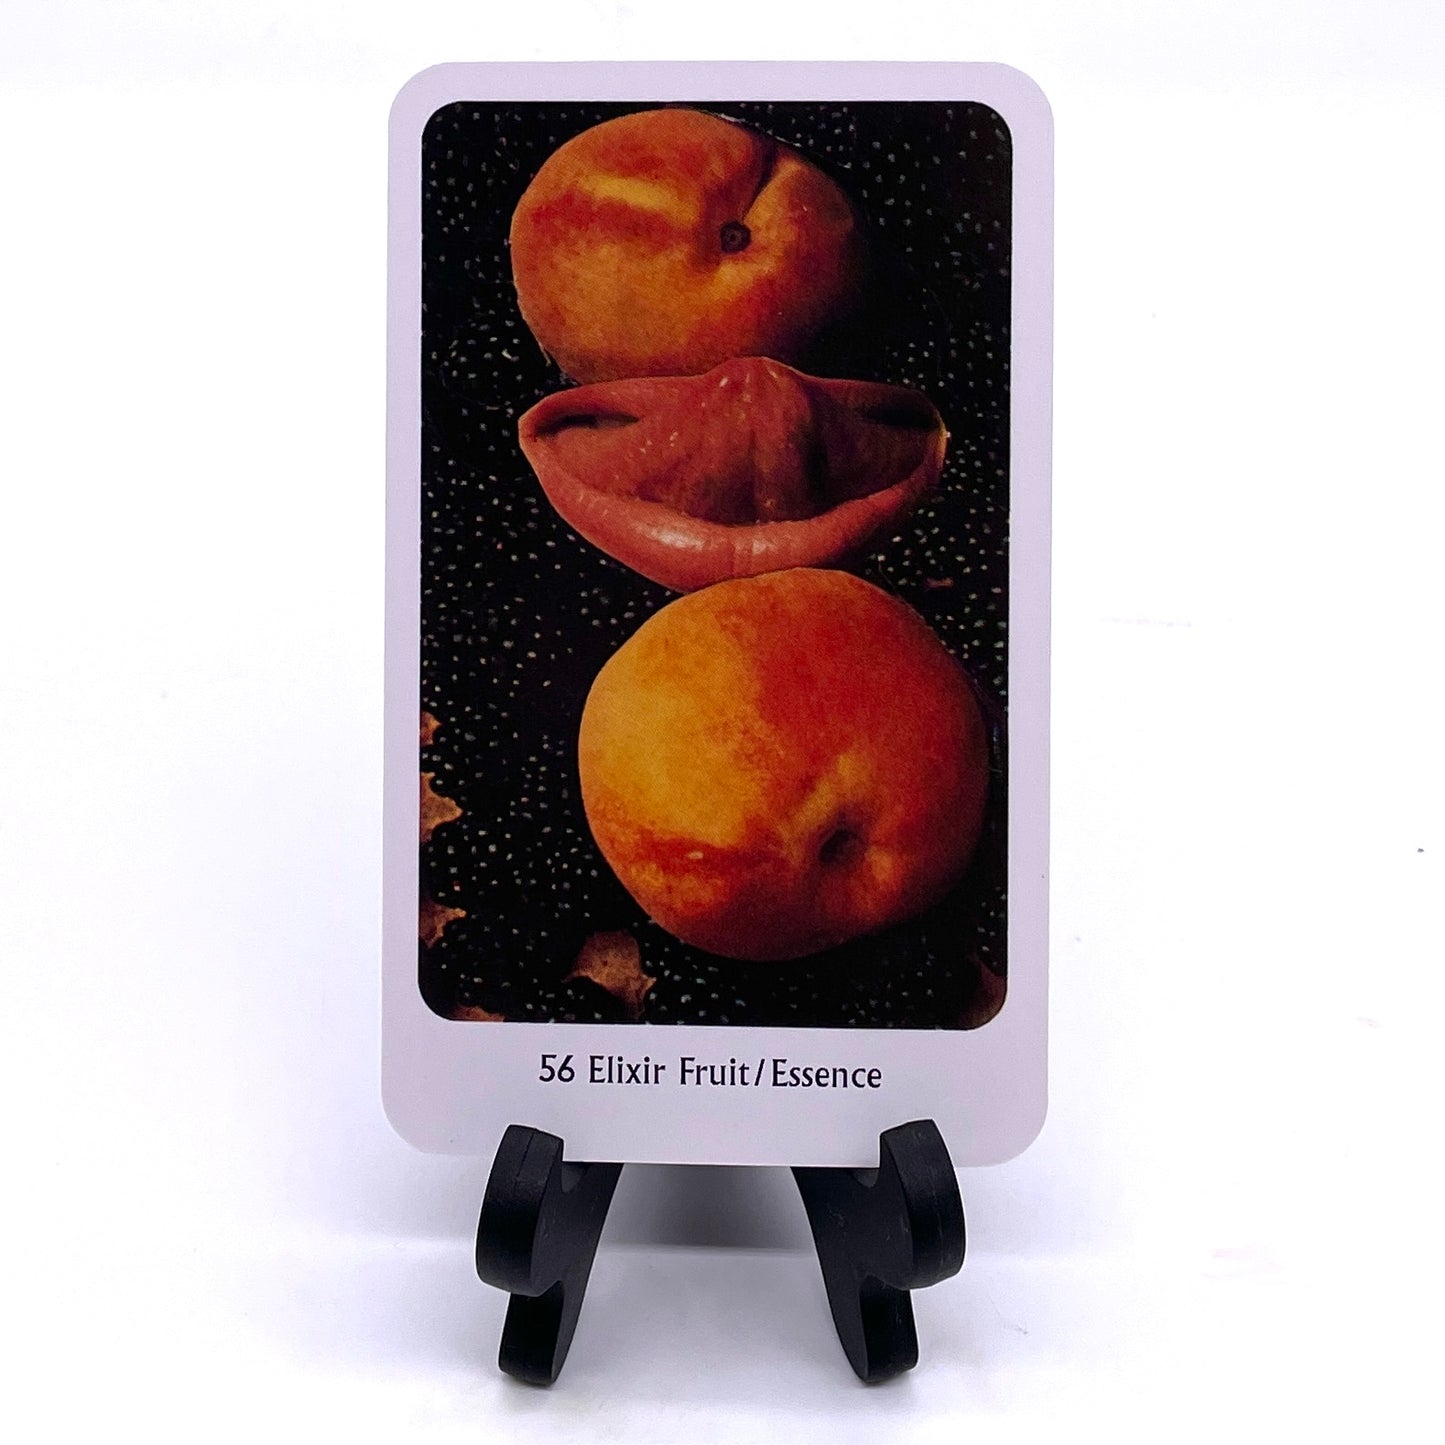 Photo of Card #56 "Elixir Fruit/Essence" featuring collaged images of stone fruit and a mouth with the tongue sticking out, against a starry backdrop.